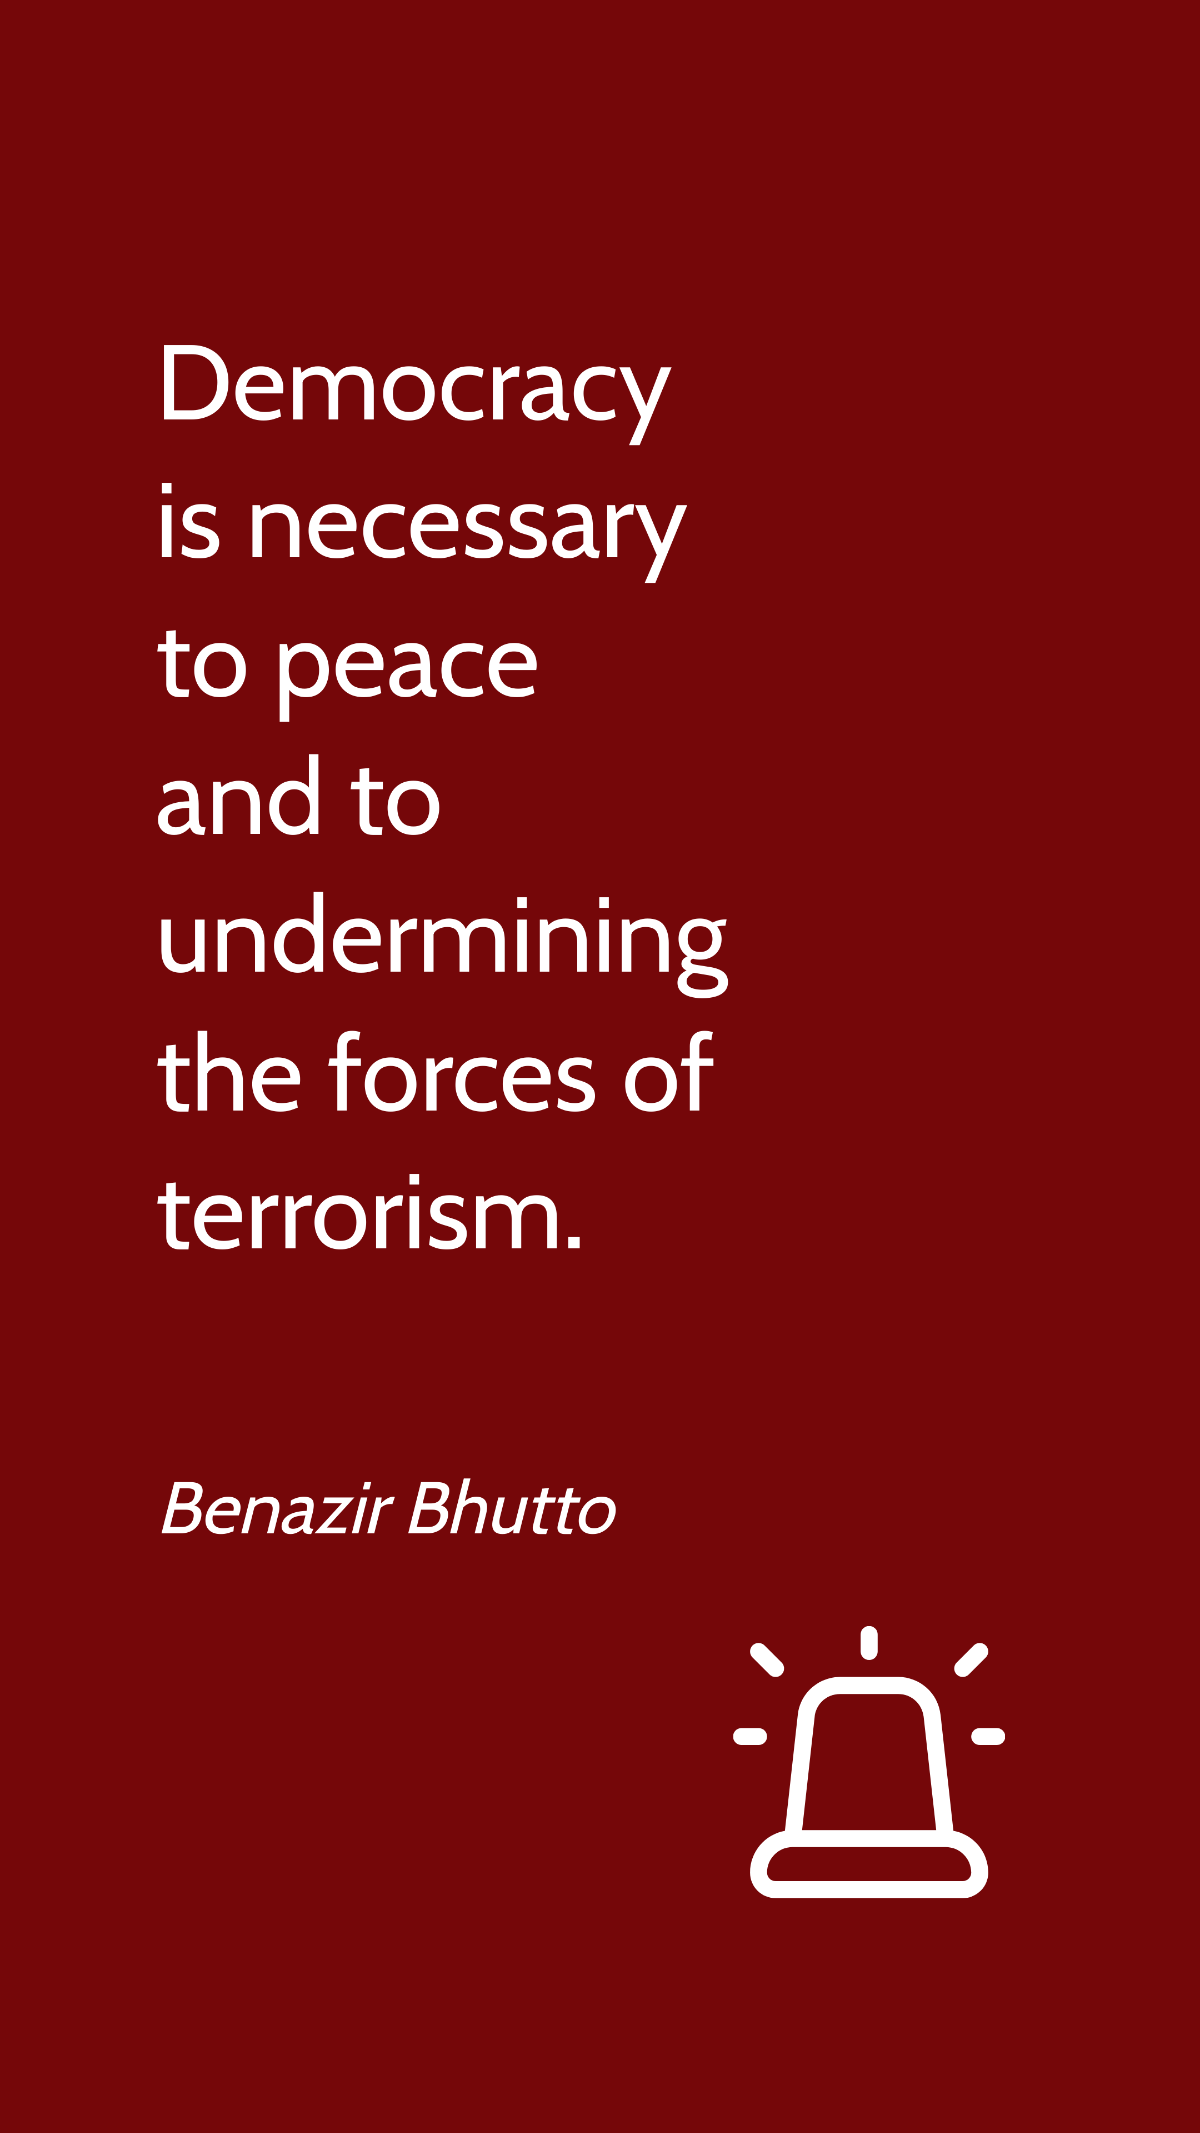 Free Benazir Bhutto - Democracy is necessary to peace and to undermining the forces of terrorism. Template